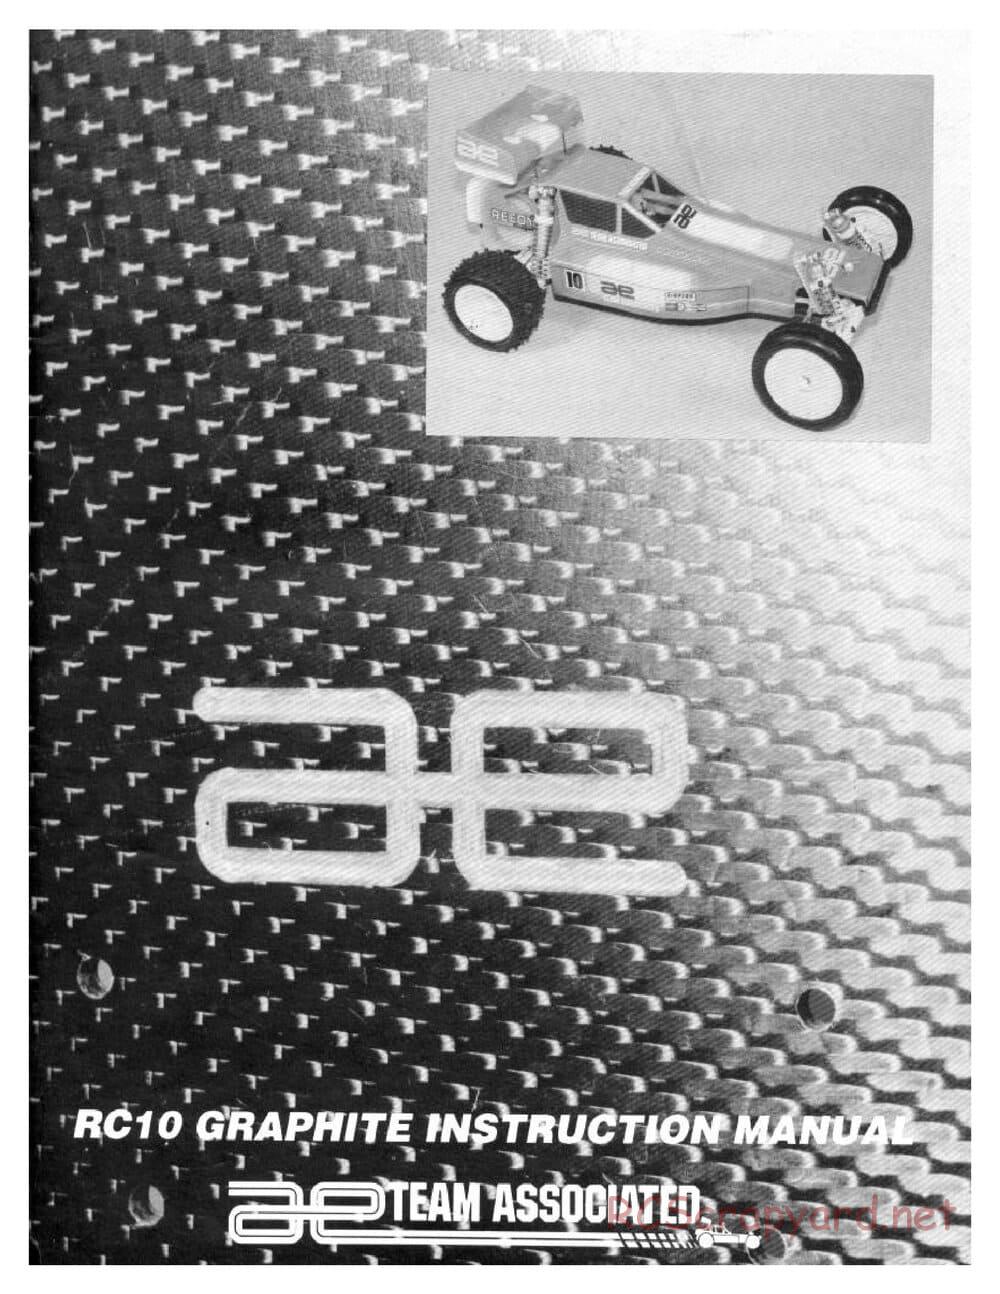 Team Associated - RC10 Graphite - Manual - Page 2